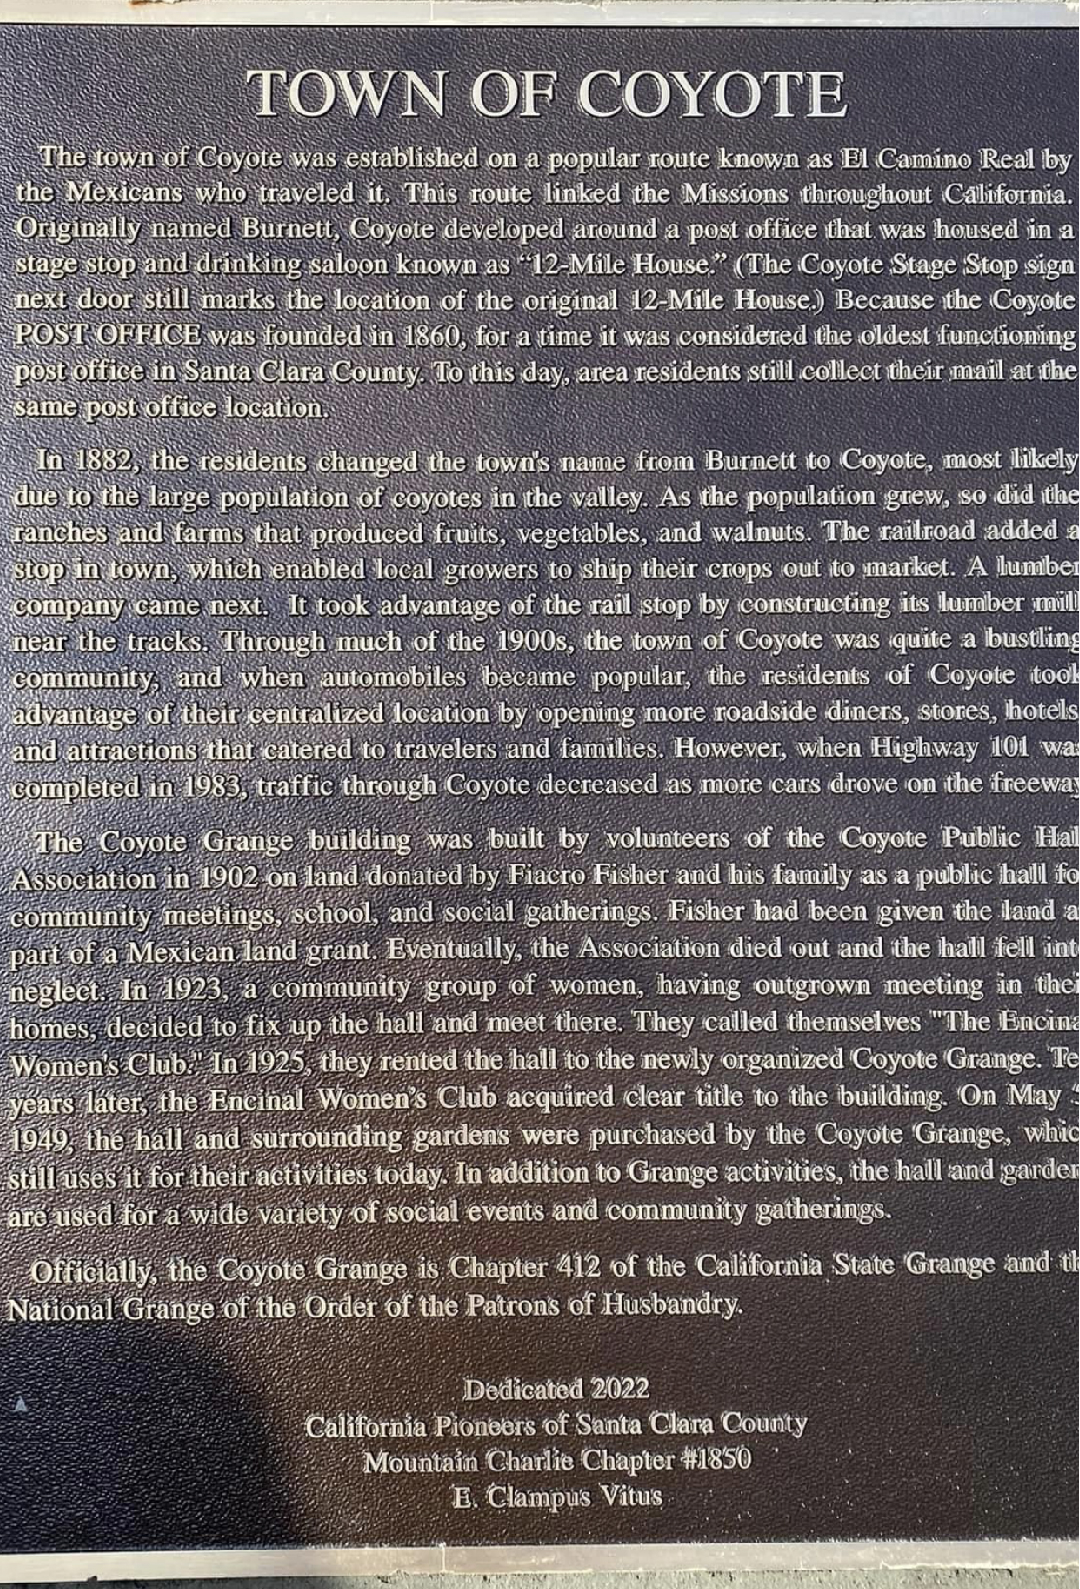 Photo of Town Of Coyote plaque detail